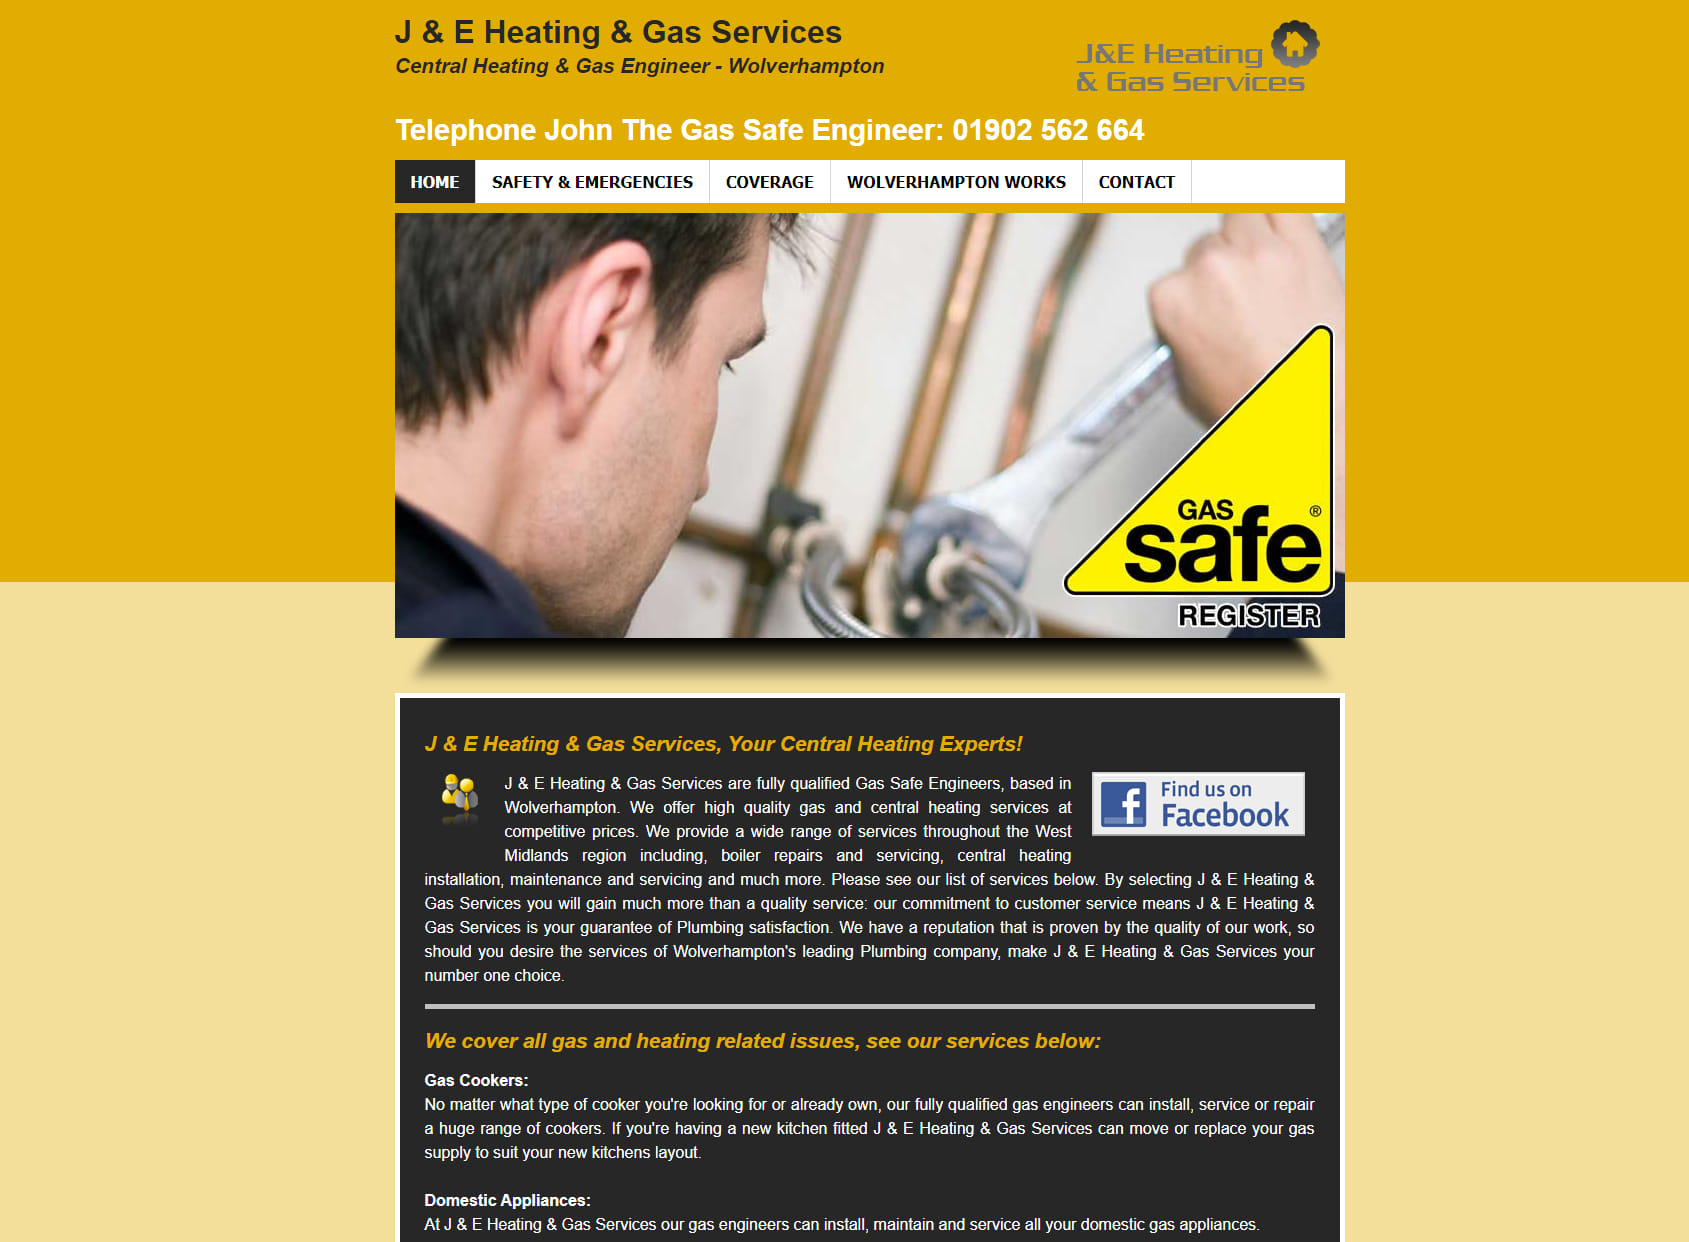 J & E Heating & Gas Services